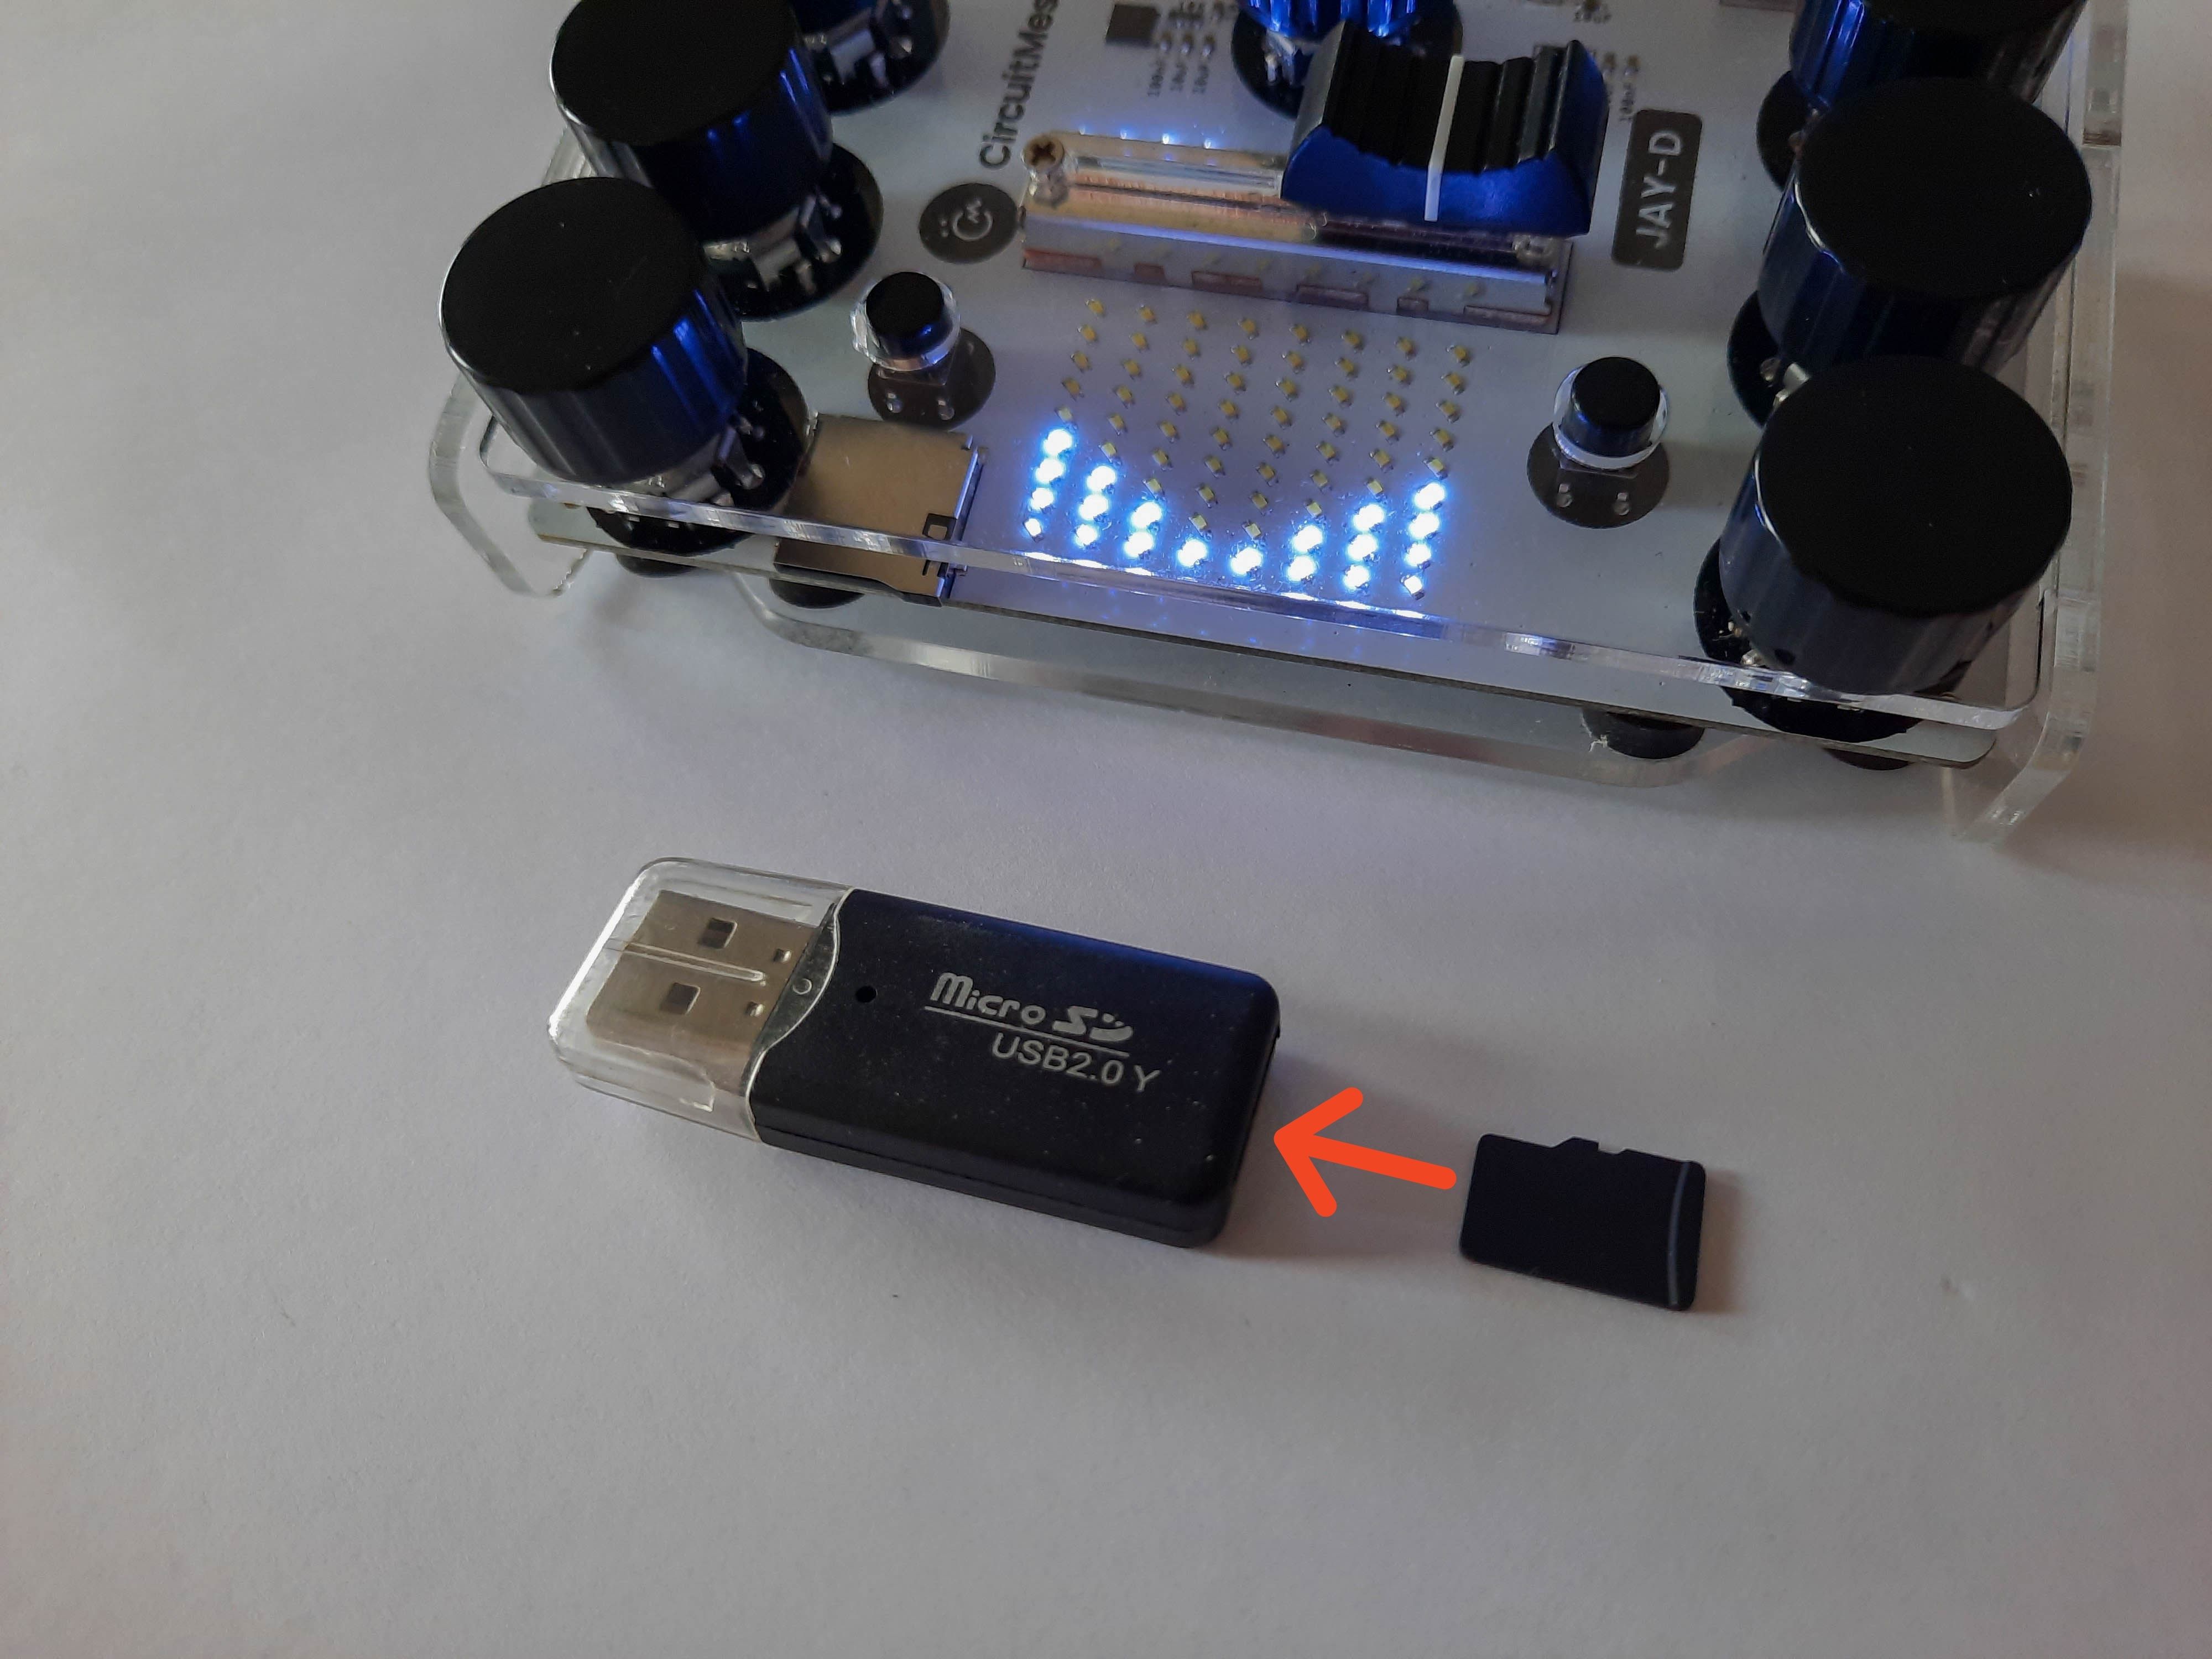 Insert the SD card into the USB